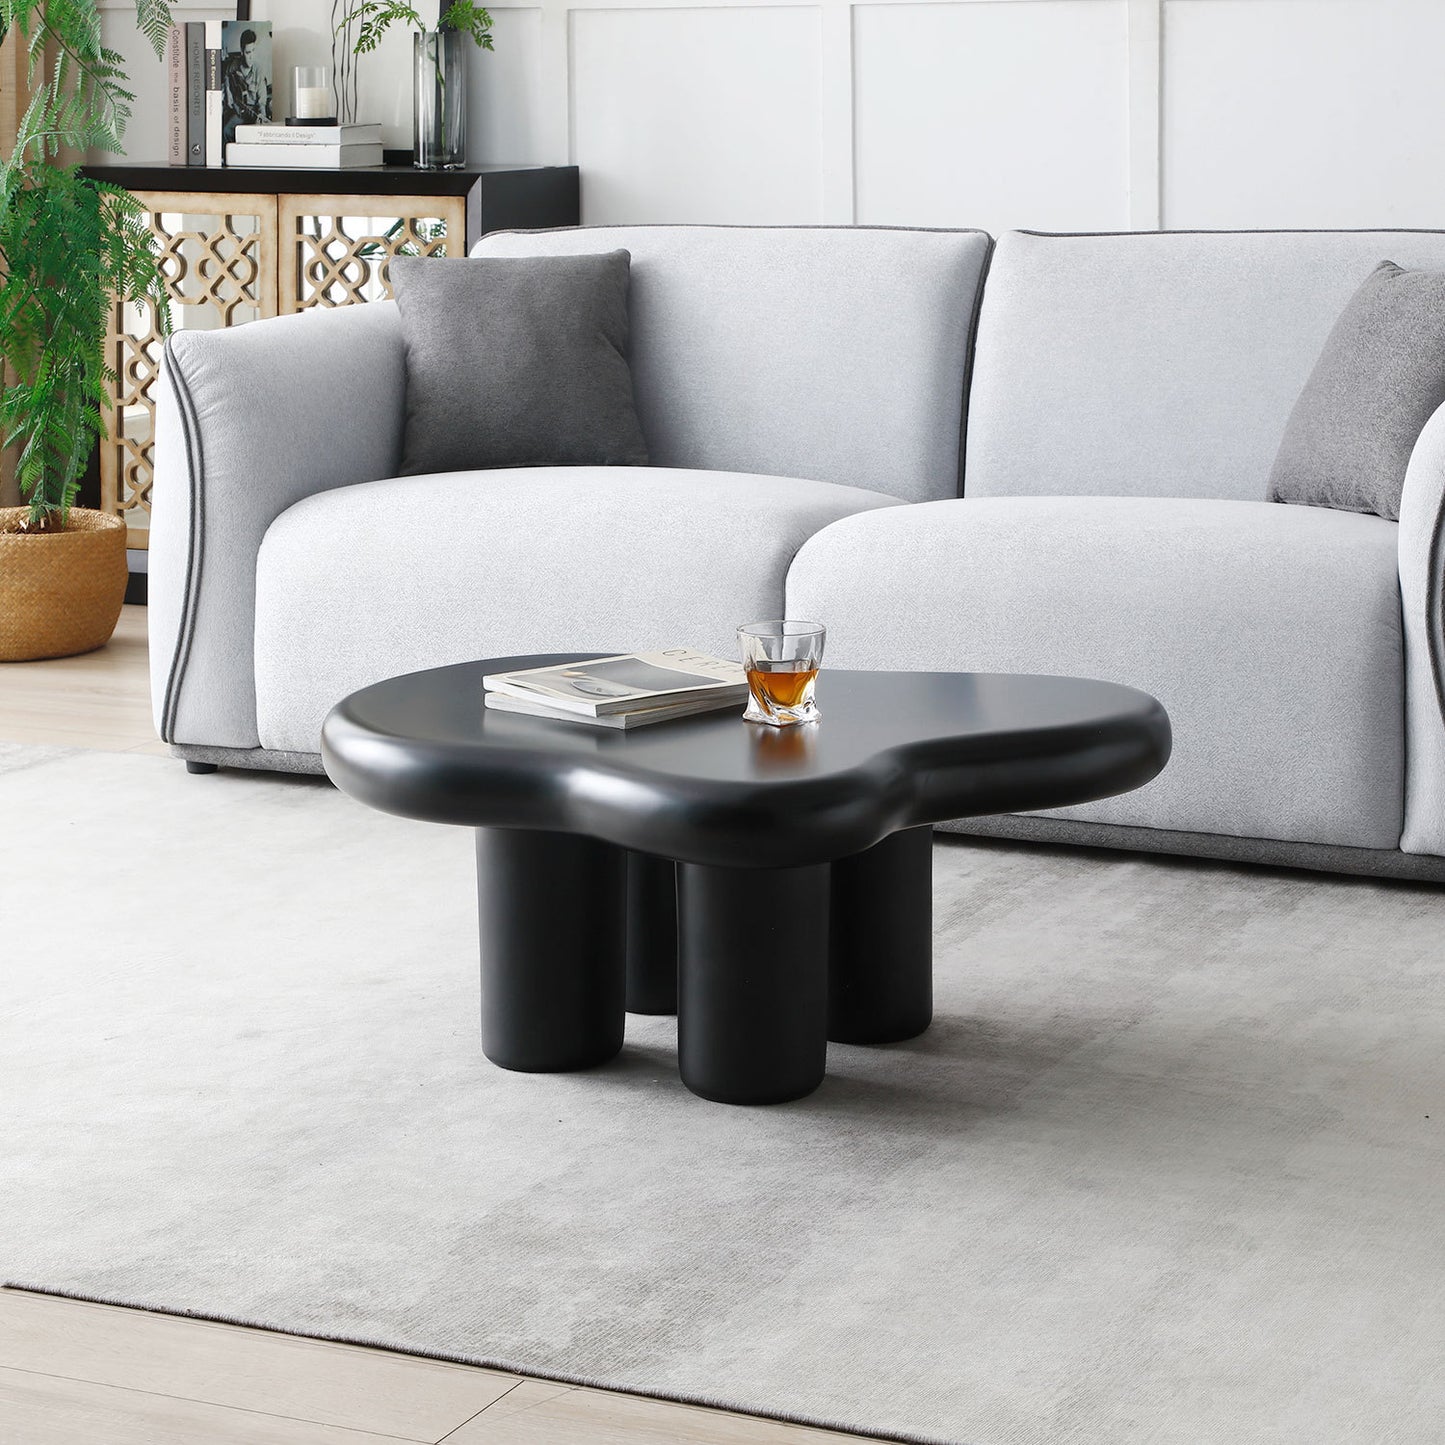 Unique Cloud-Shaped Coffee Table for Your Living Space, Black, 35.43inch